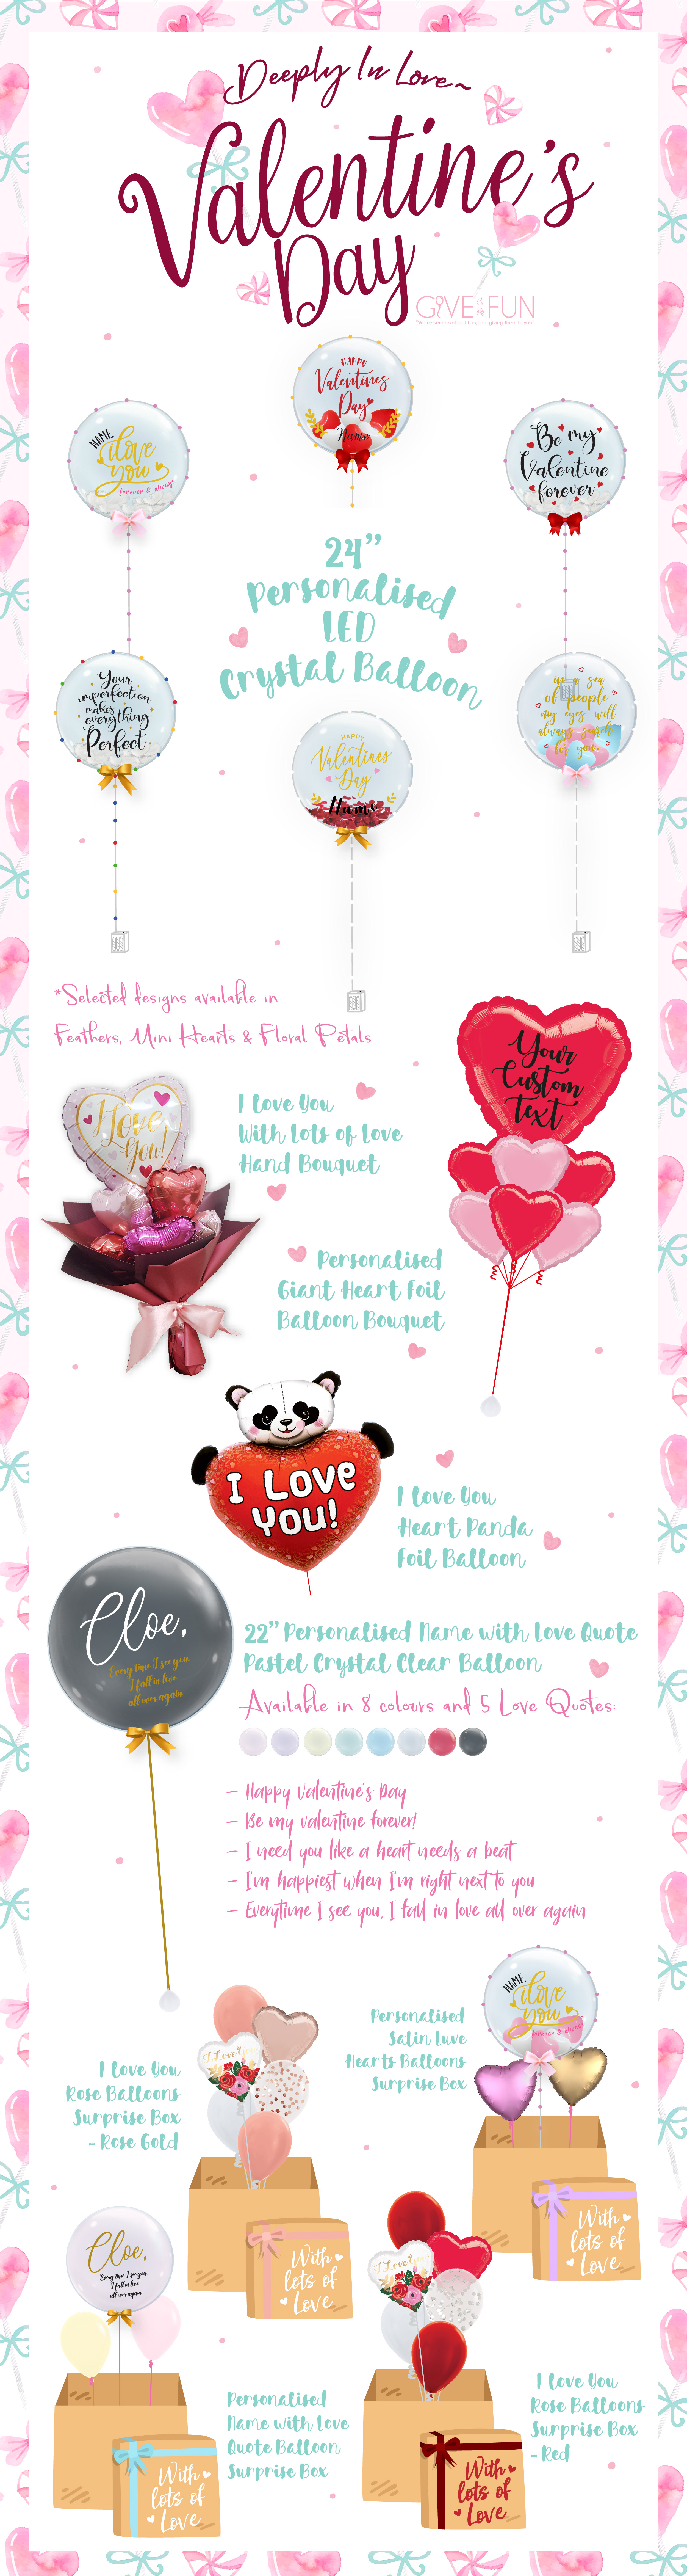 Valentine's Day Personalised Balloons